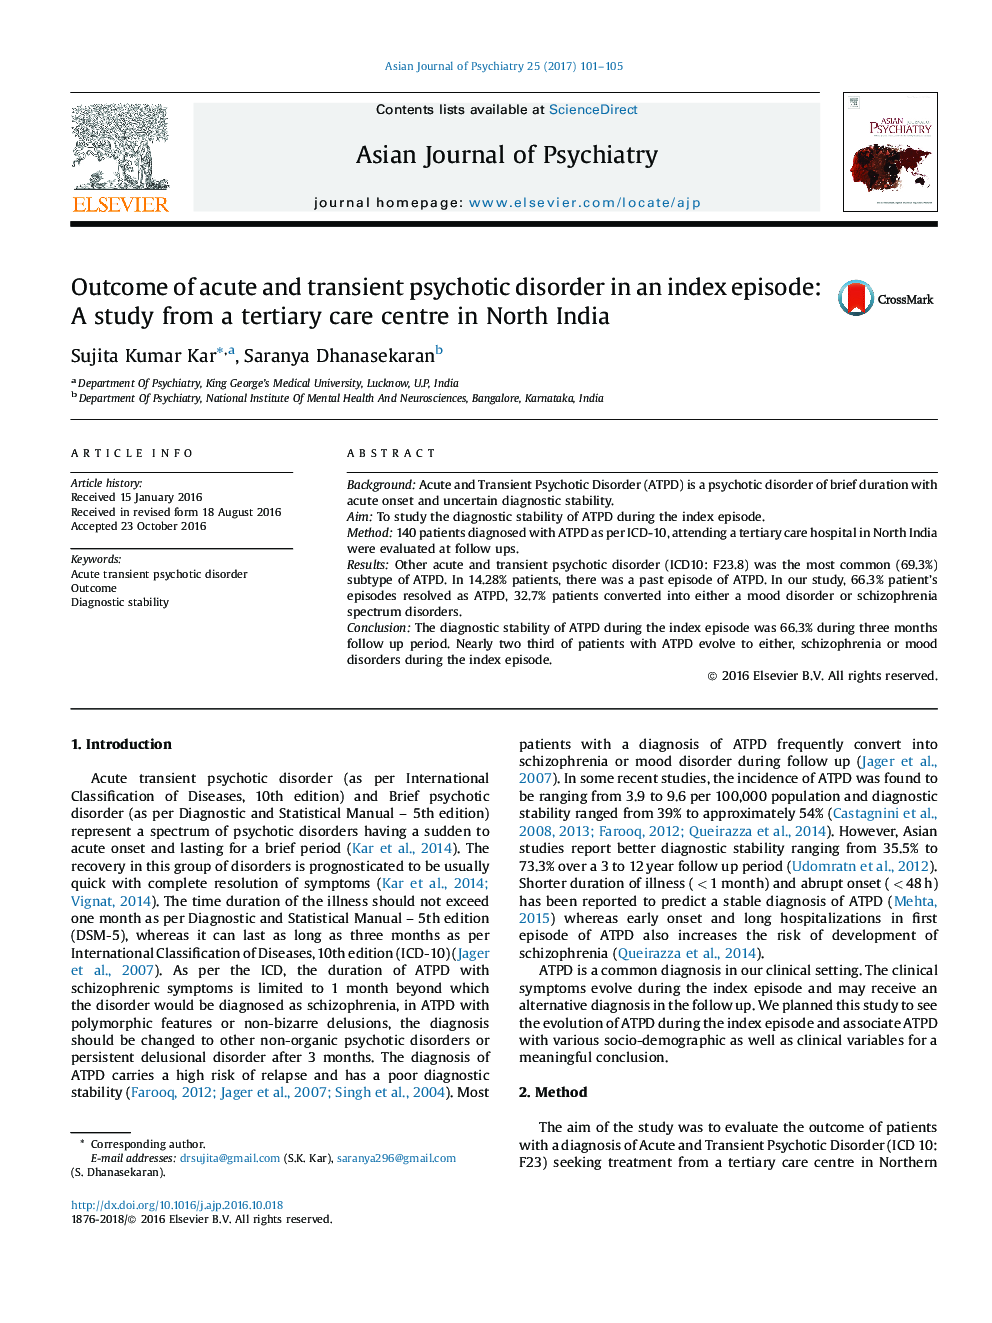 Outcome of acute and transient psychotic disorder in an index episode: A study from a tertiary care centre in North India